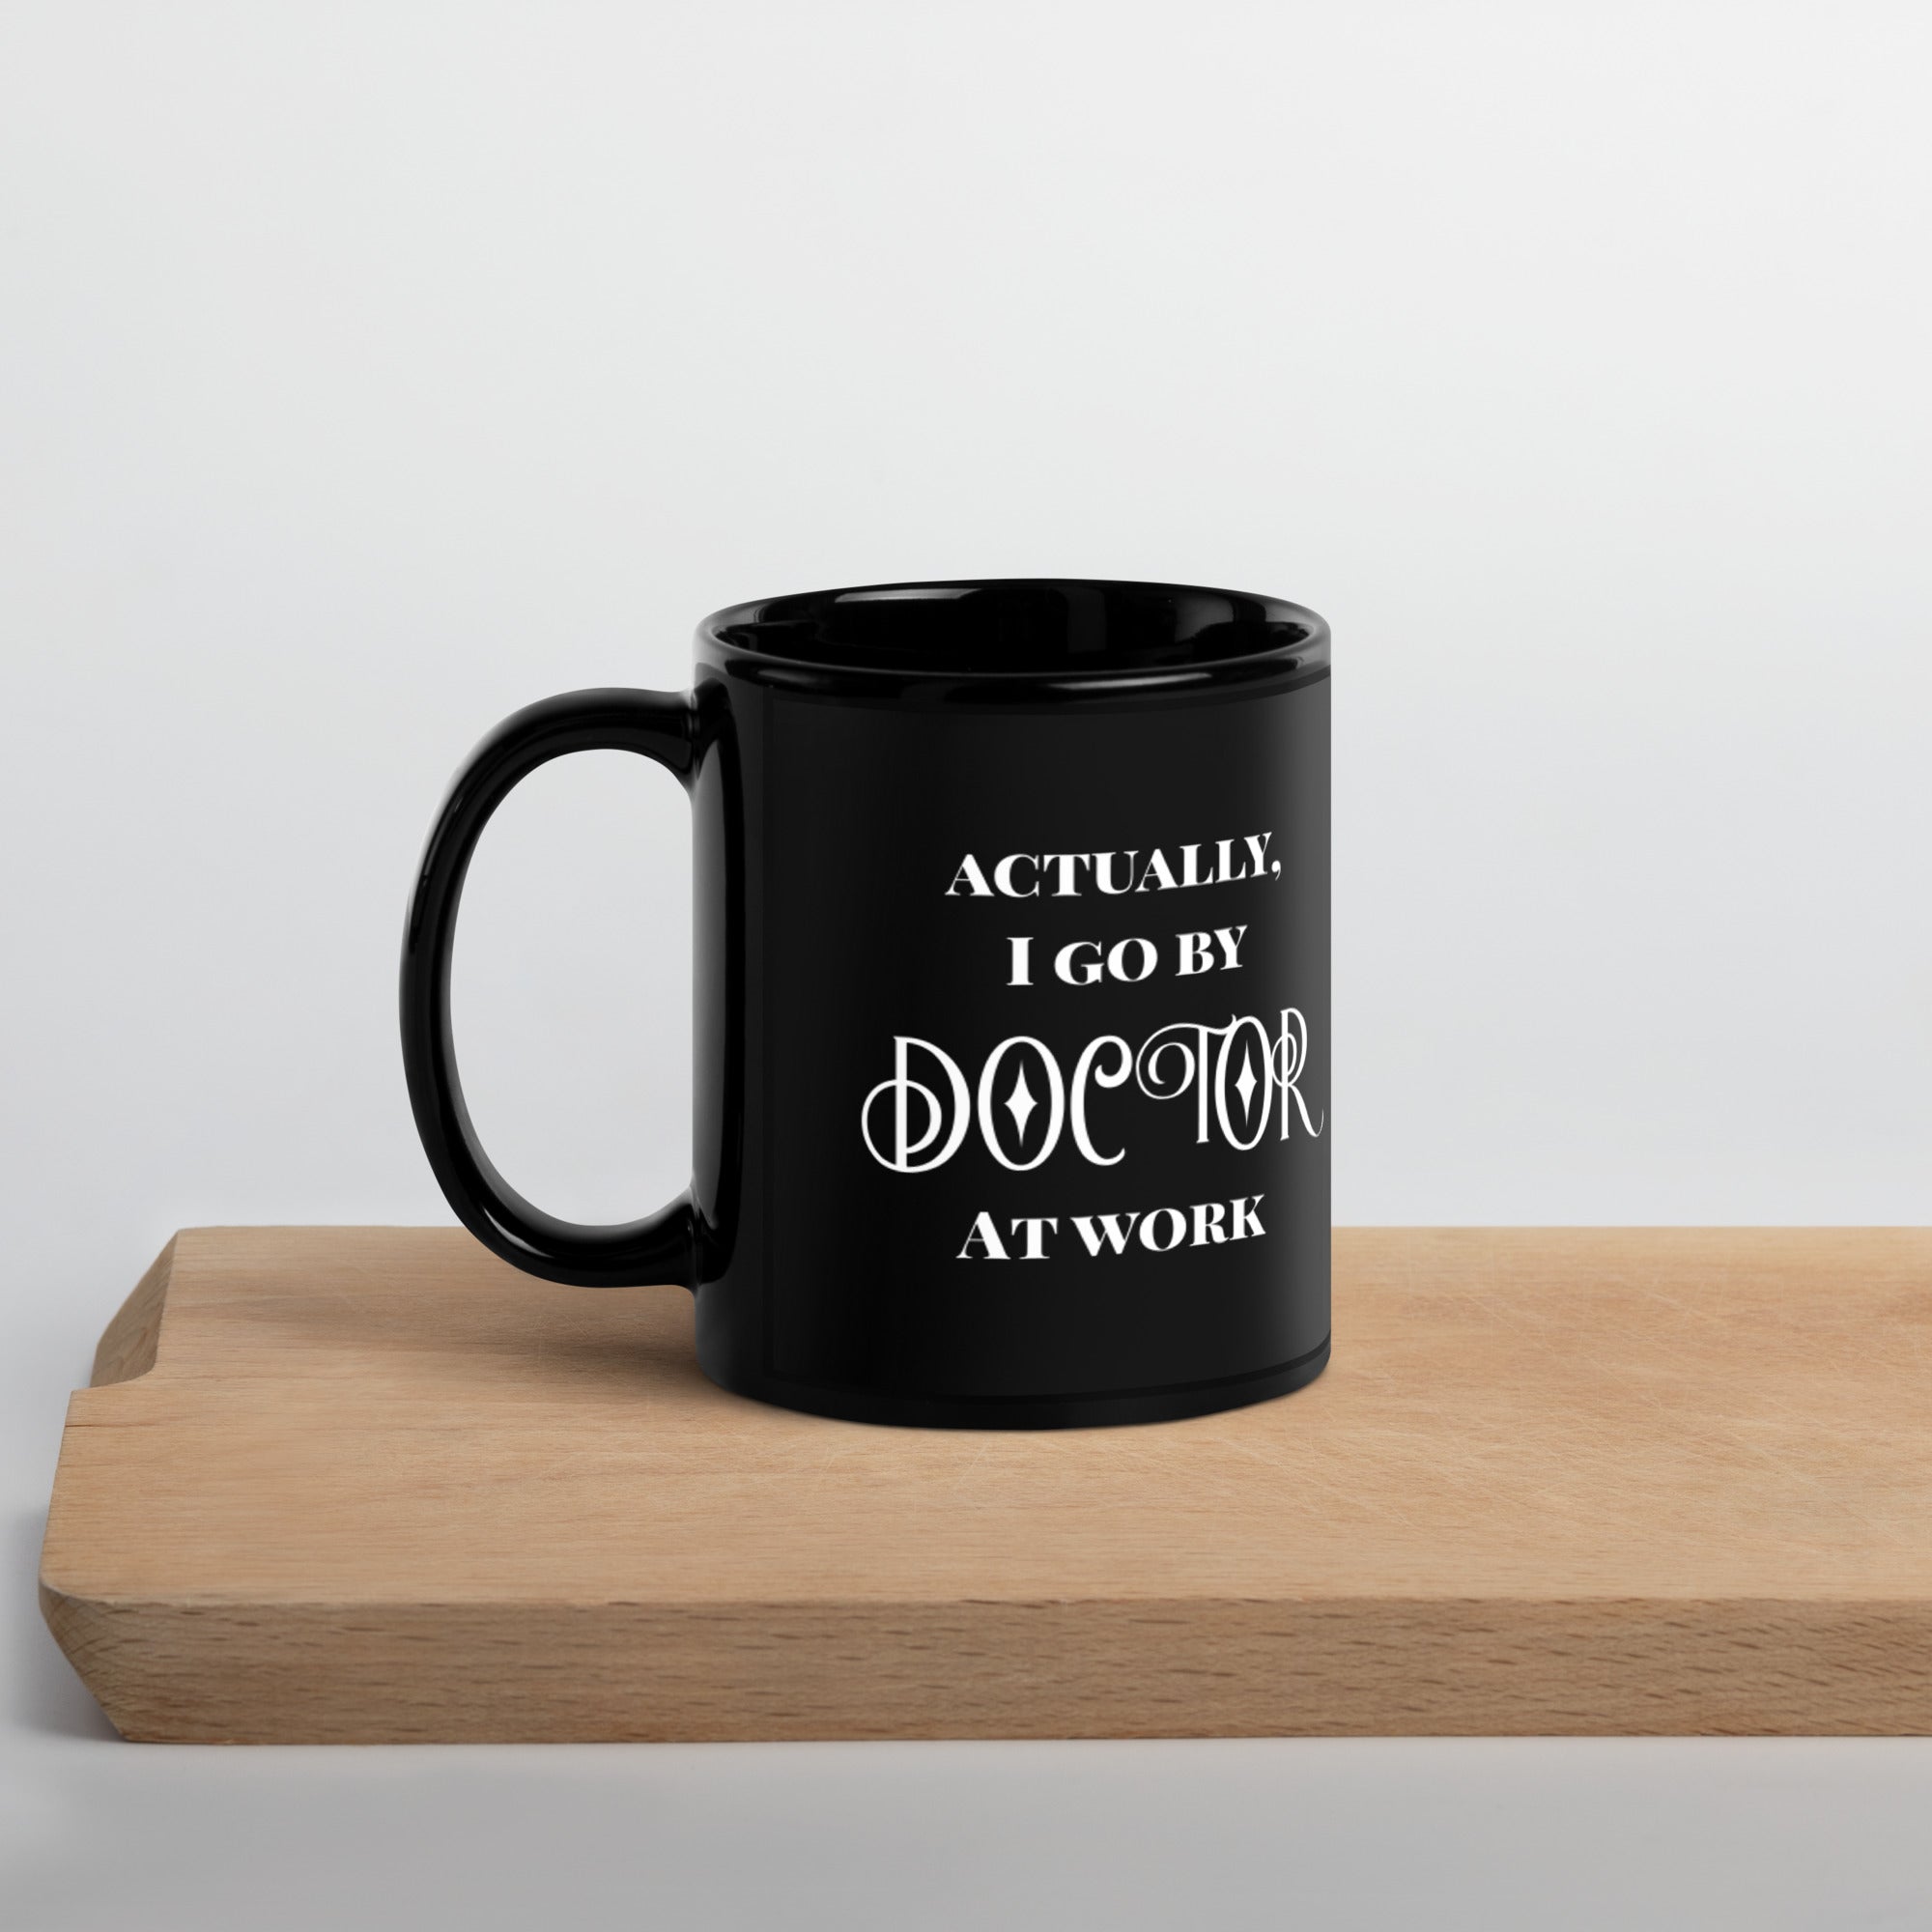 Actually, I go by DOCTOR at work funny physician doctor gift Black Glossy Mug